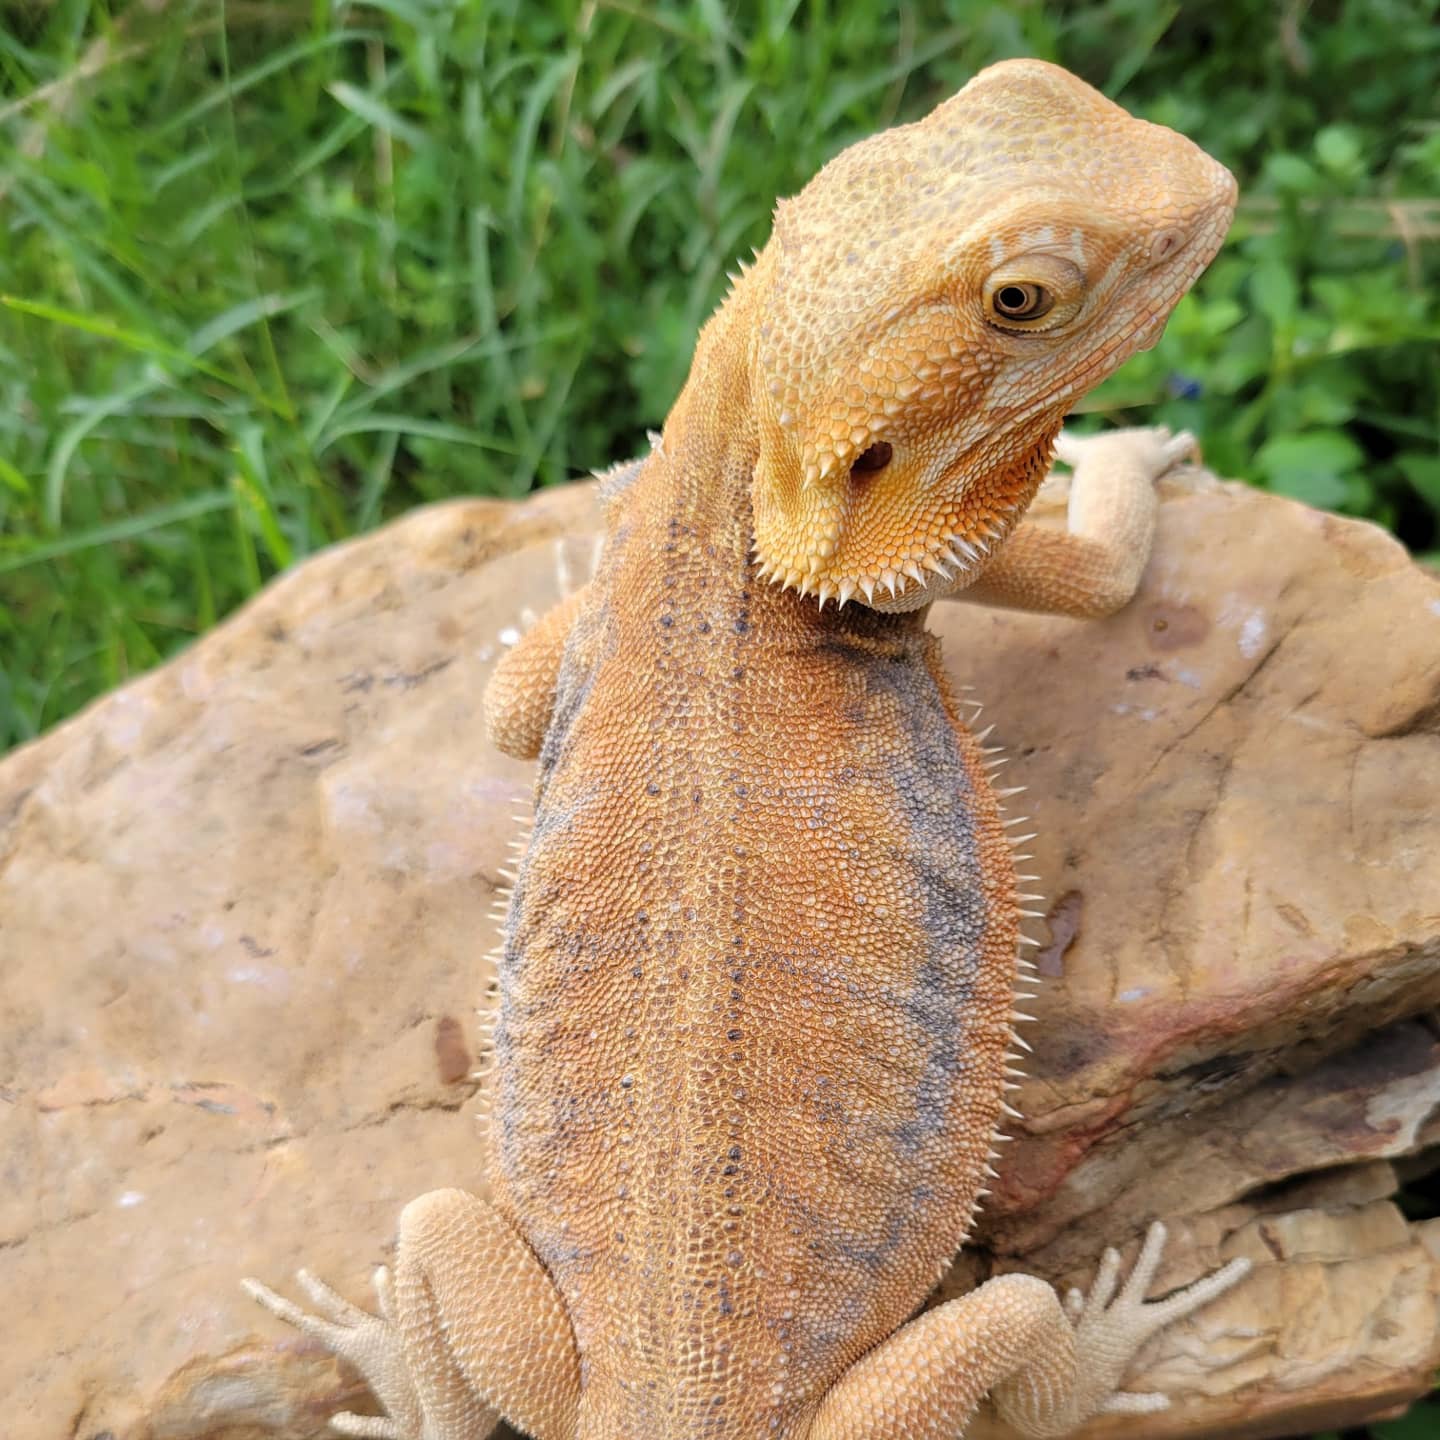 Hypo Leatherback Dunner 66% Het Zero 50% Het Wit Central Bearded Dragon by Wicked Dragons